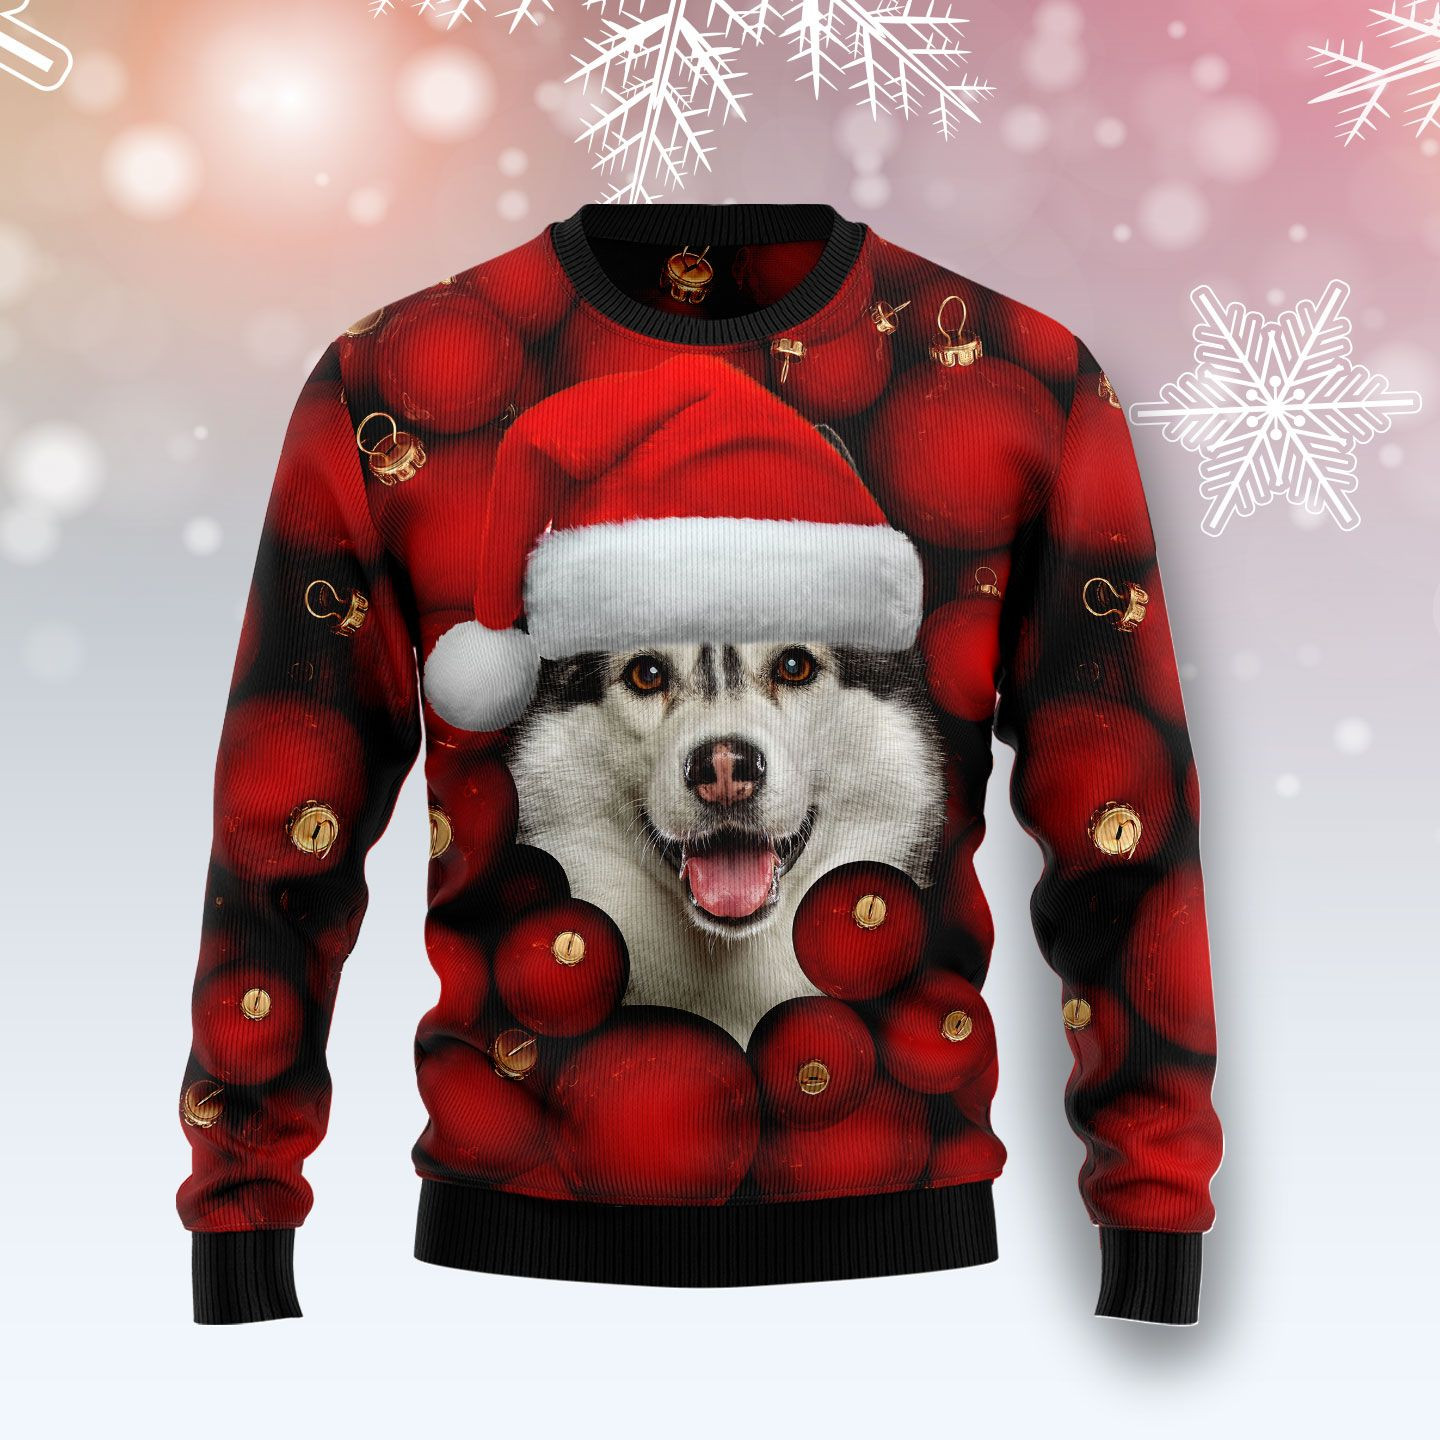 Siberian Husky Ornament Ugly Christmas Sweater Ugly Sweater For Men Women, Holiday Sweater